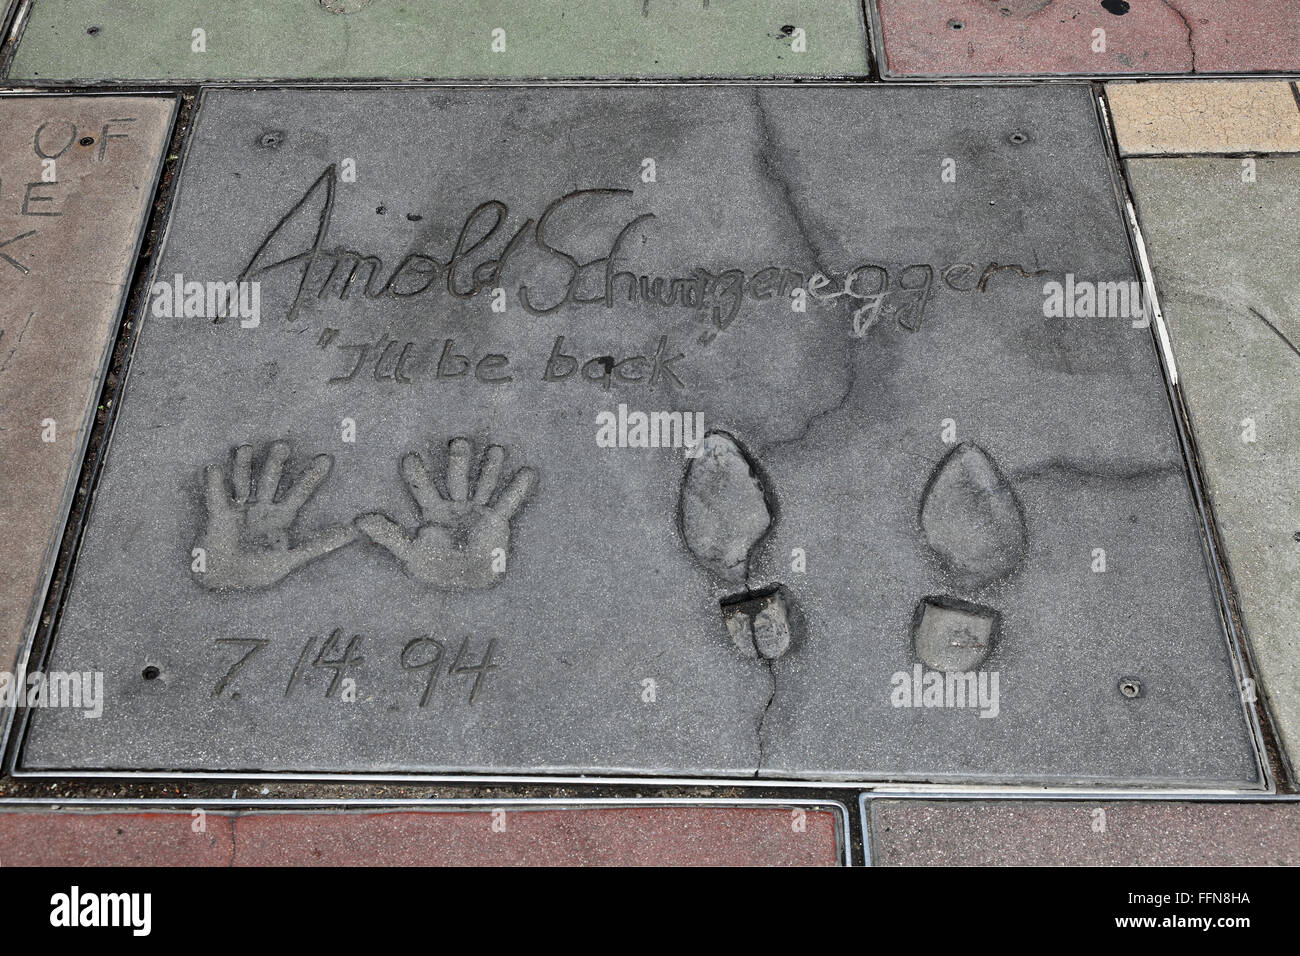 Schwarzenegger, Arnold, * 30. 7.1947, Austrian actor, hand- and shoe prints, Grauman's Chinese Theater, Hollywood Blvd, Hollywood, Los Angeles, California, USA, Stock Photo